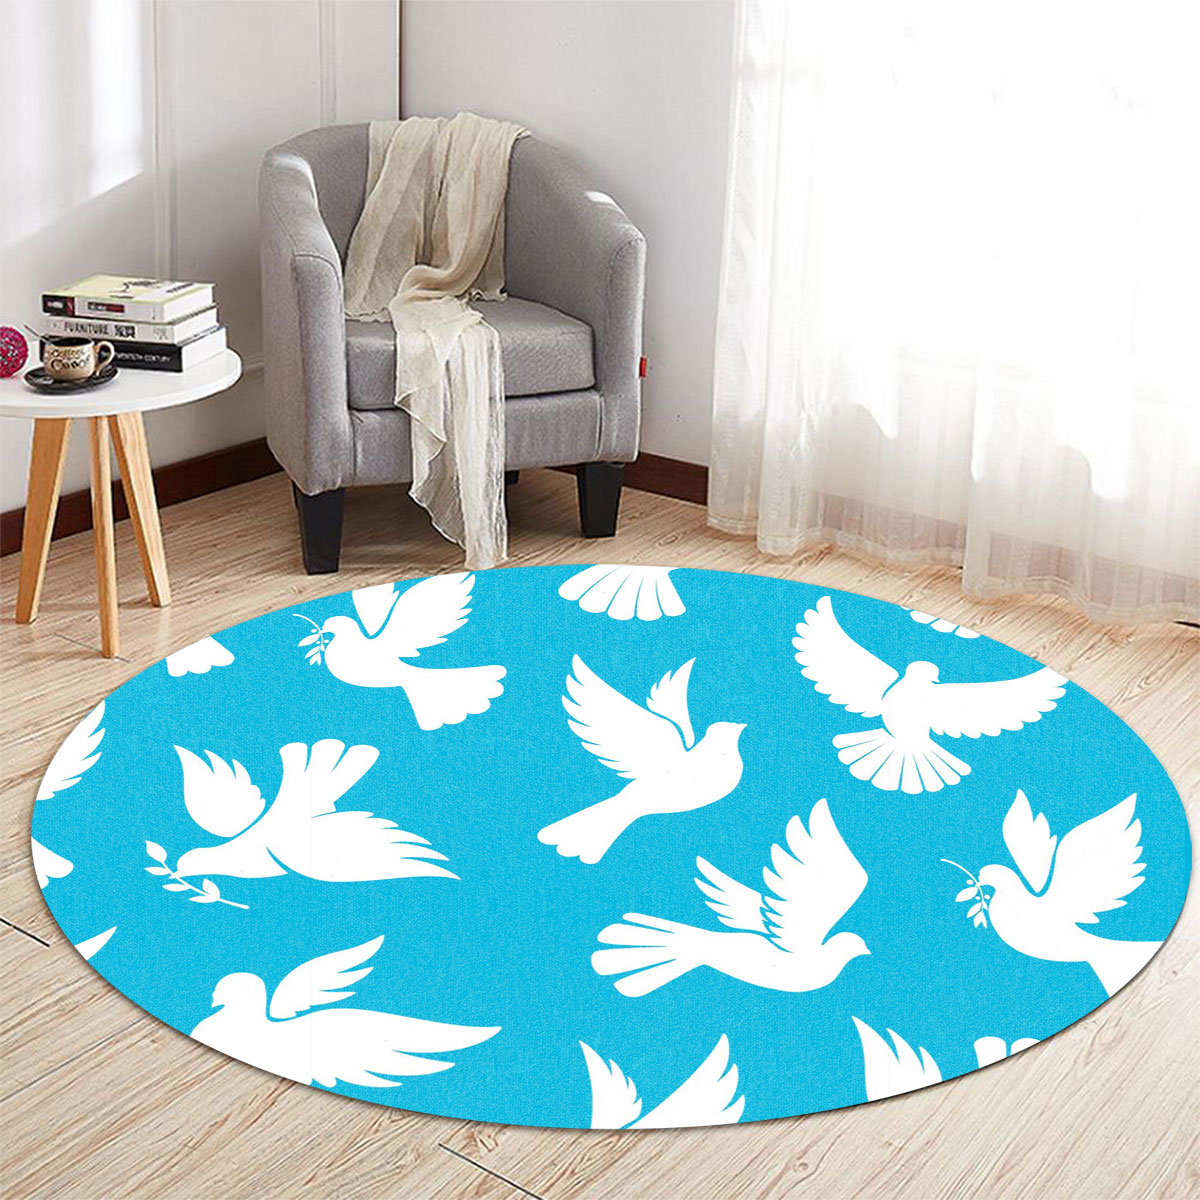 Flying Dove Peace Round Carpet 6